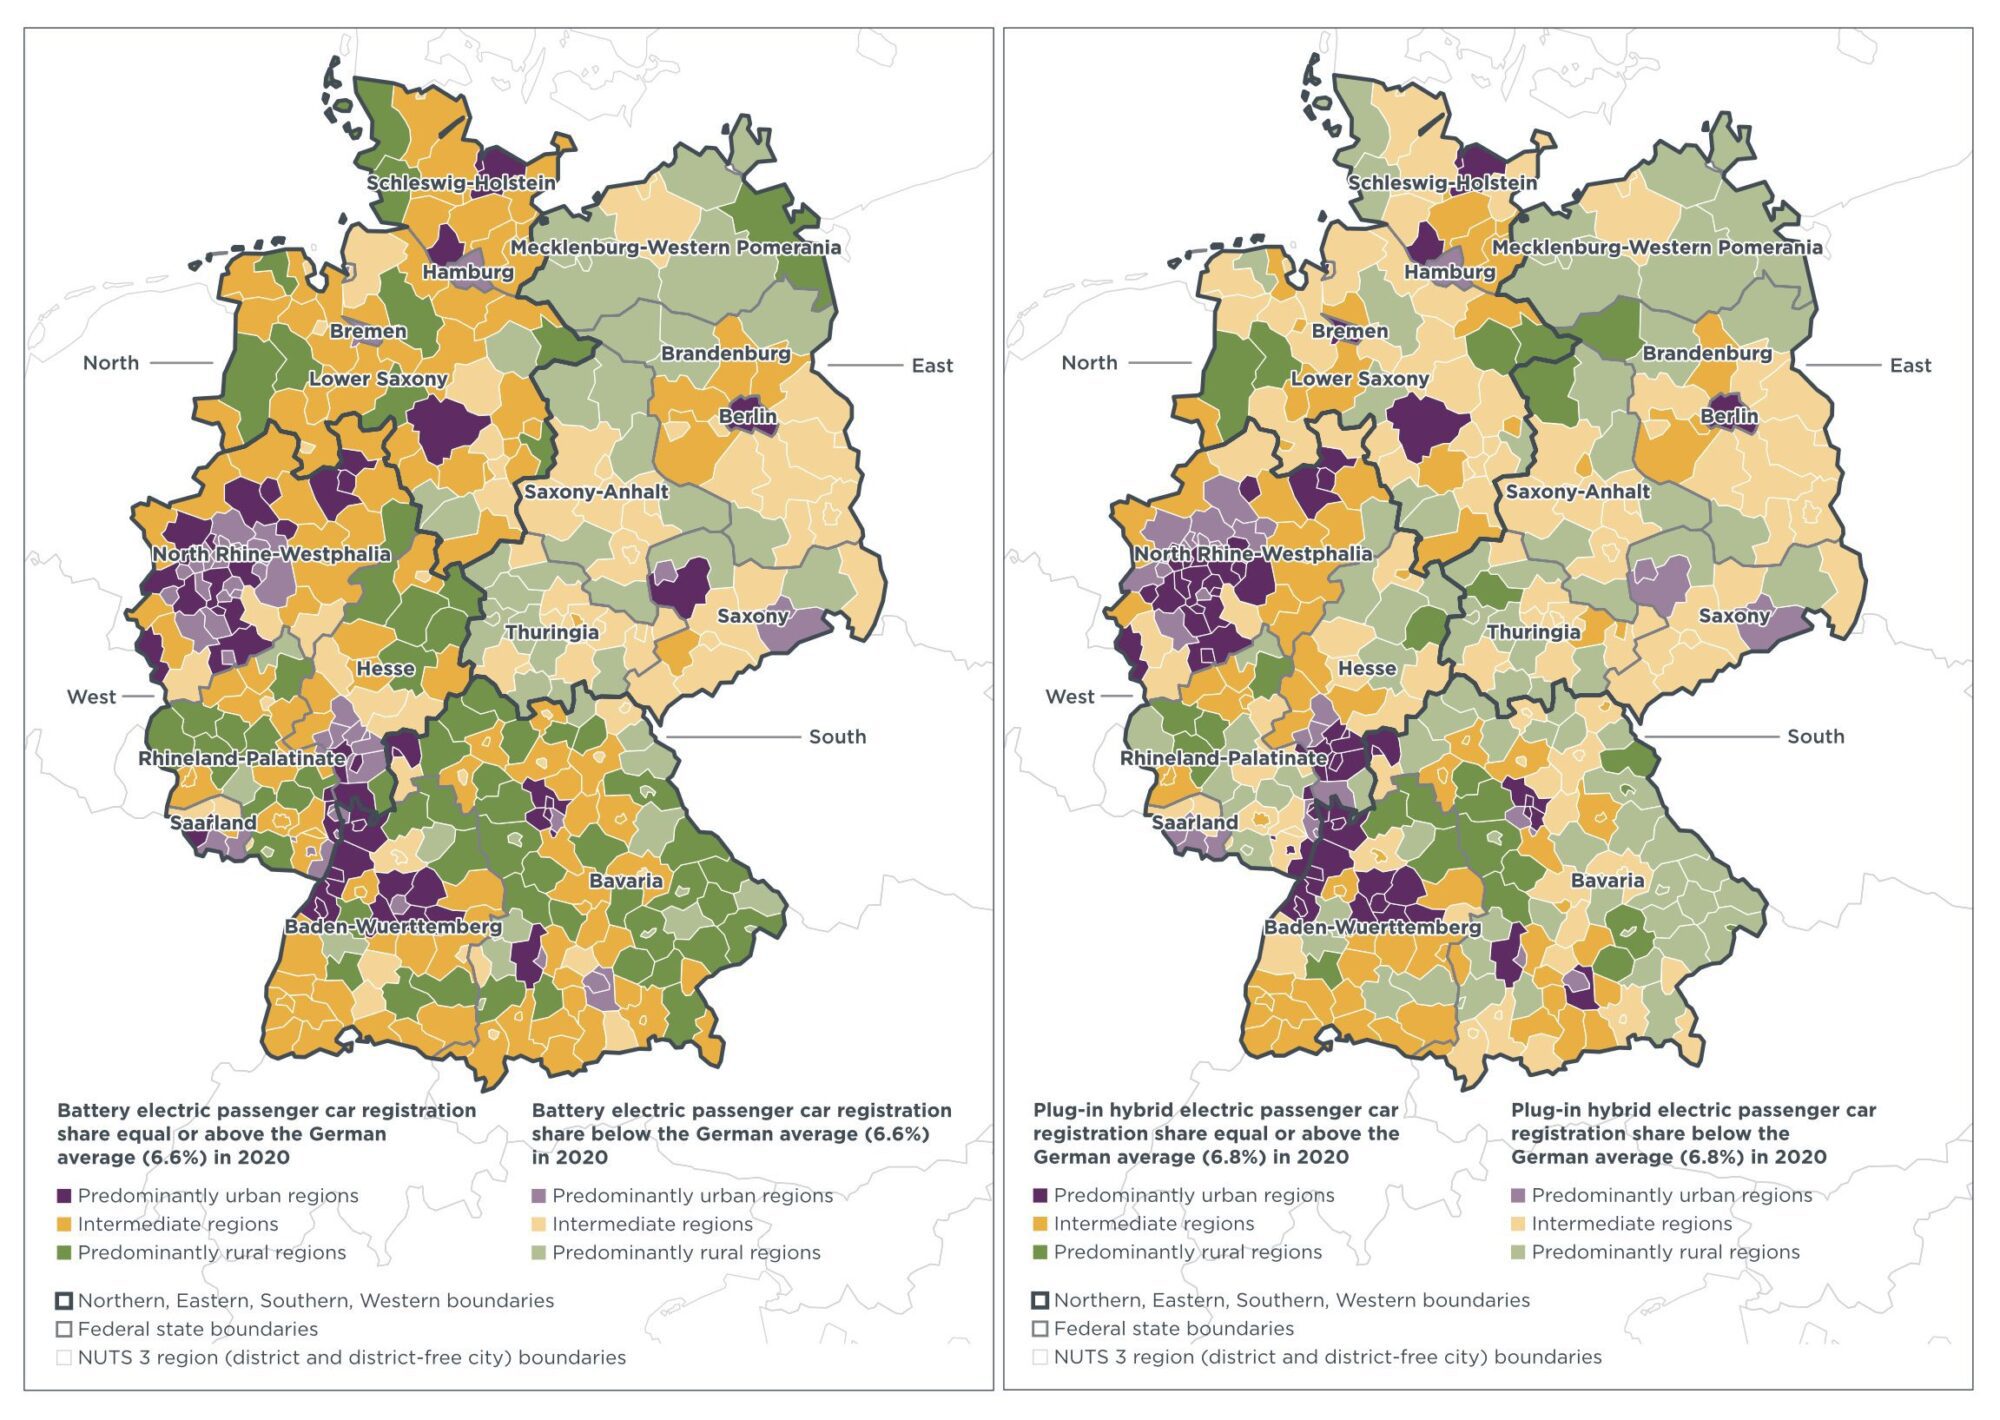 Maps showing distribution of electric vehicles and plug-in hybrid vehicles in Germany